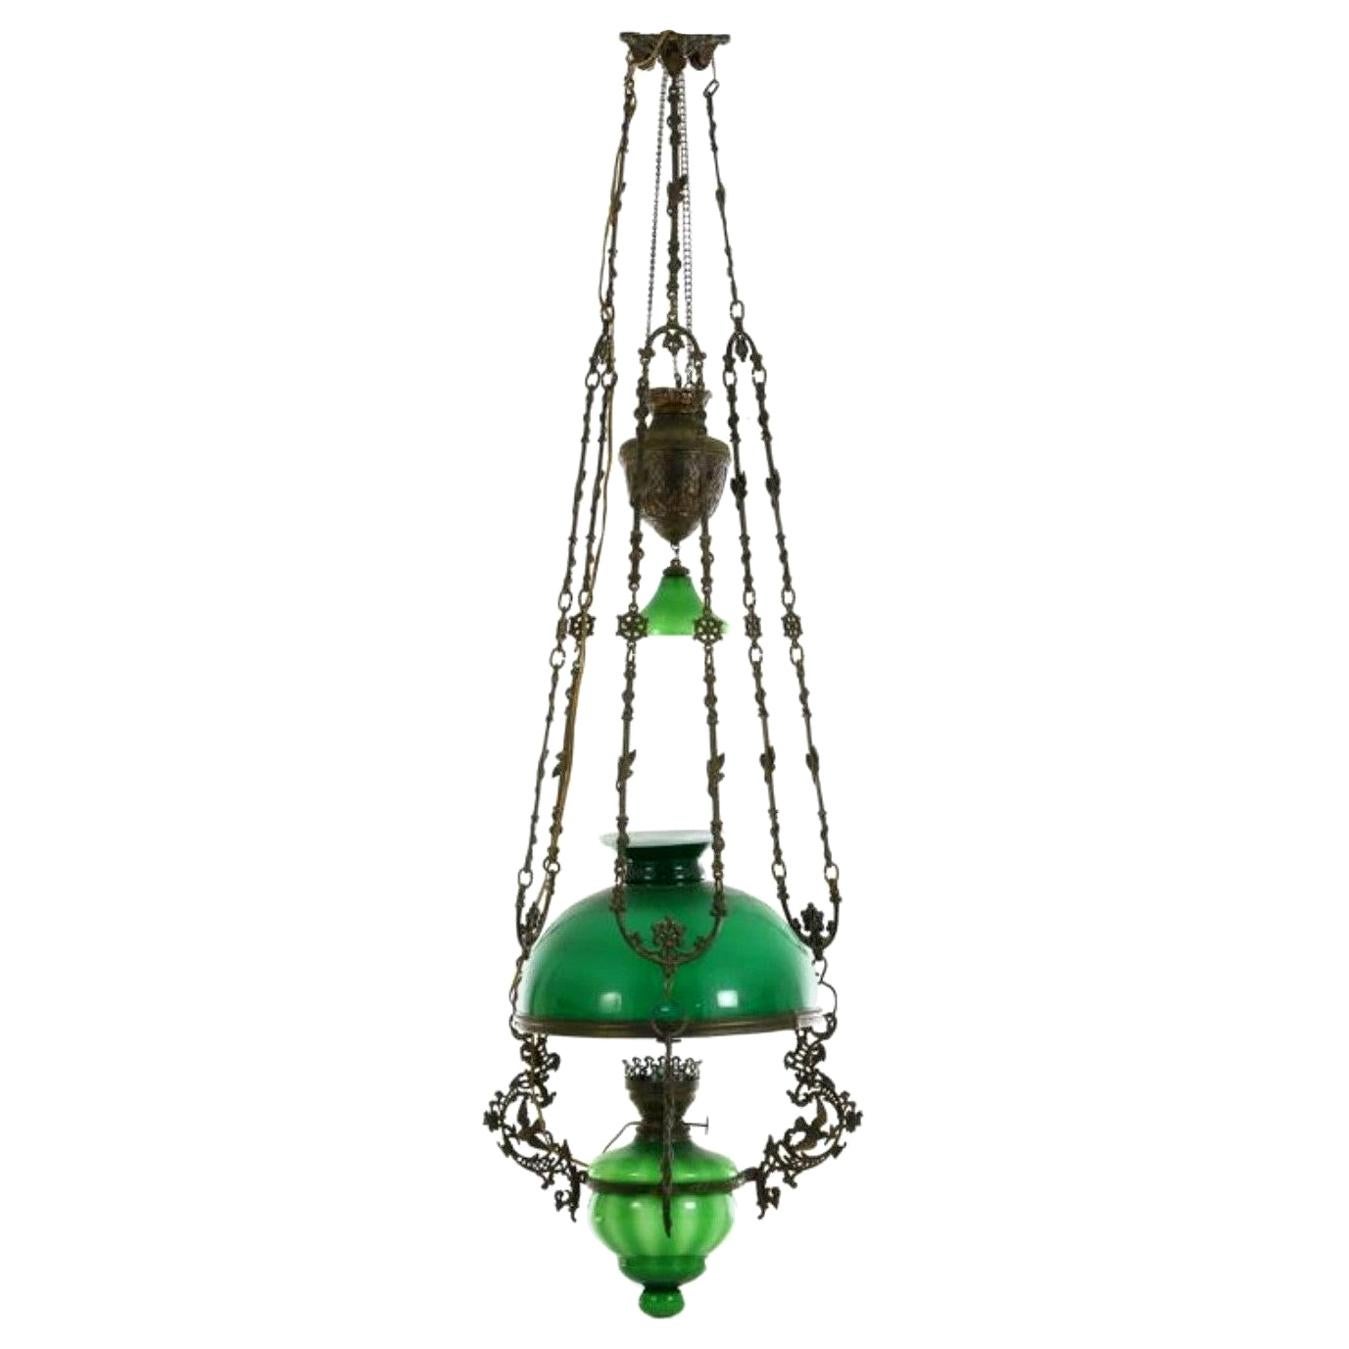 Victorian Hanging Oil Lamp Converted to Electric Chandelier, England